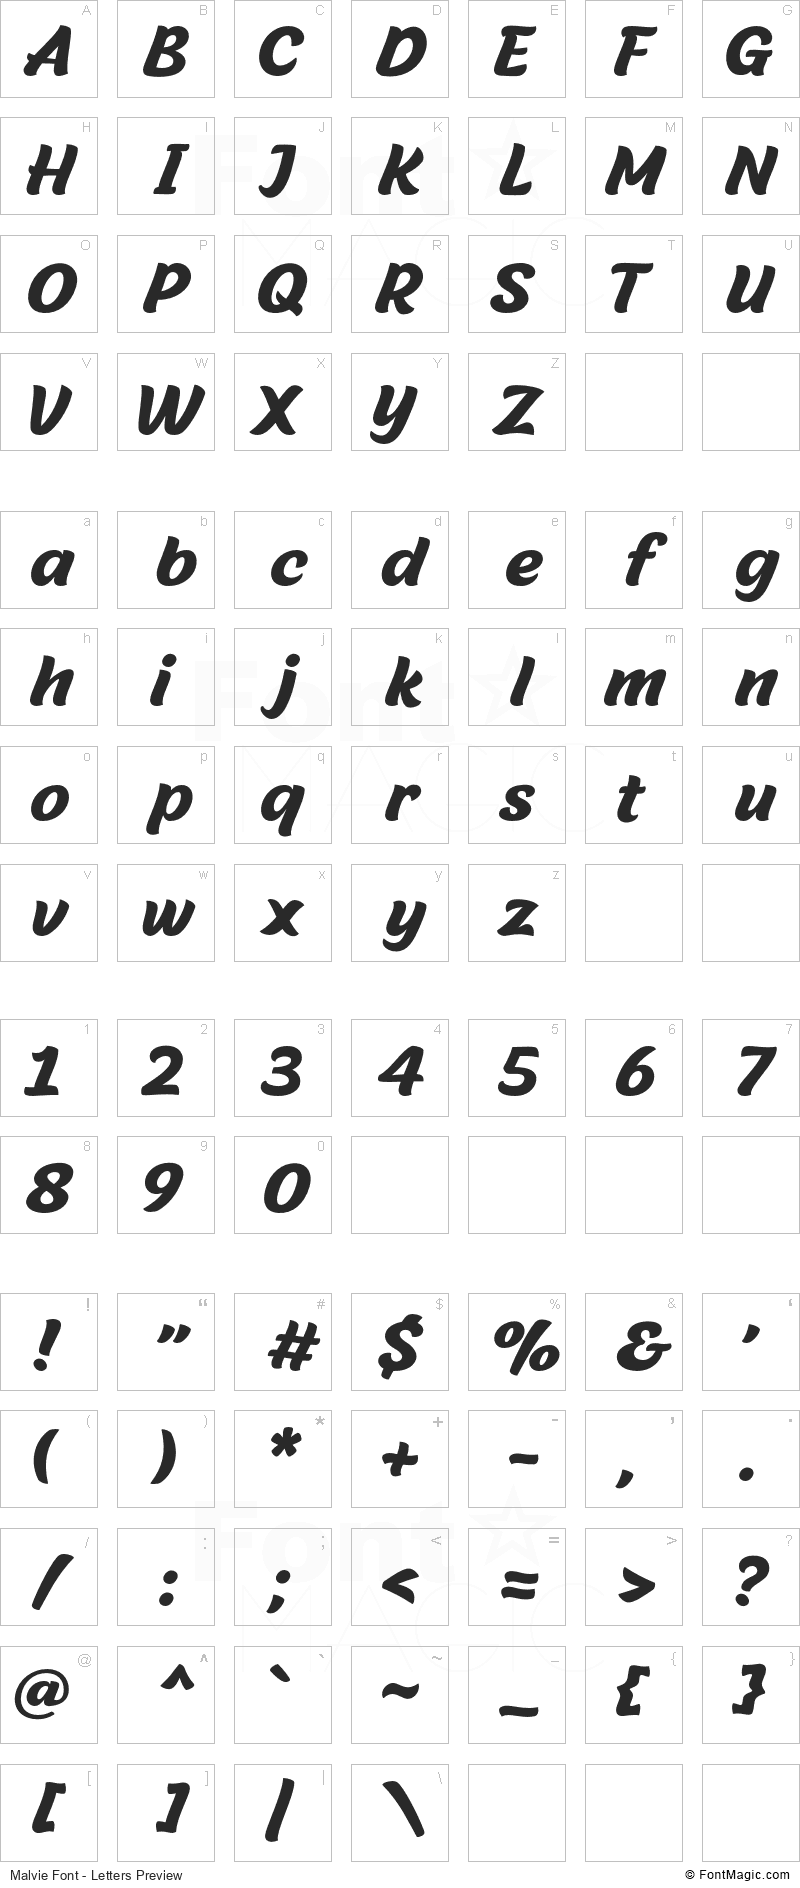 Malvie Font - All Latters Preview Chart